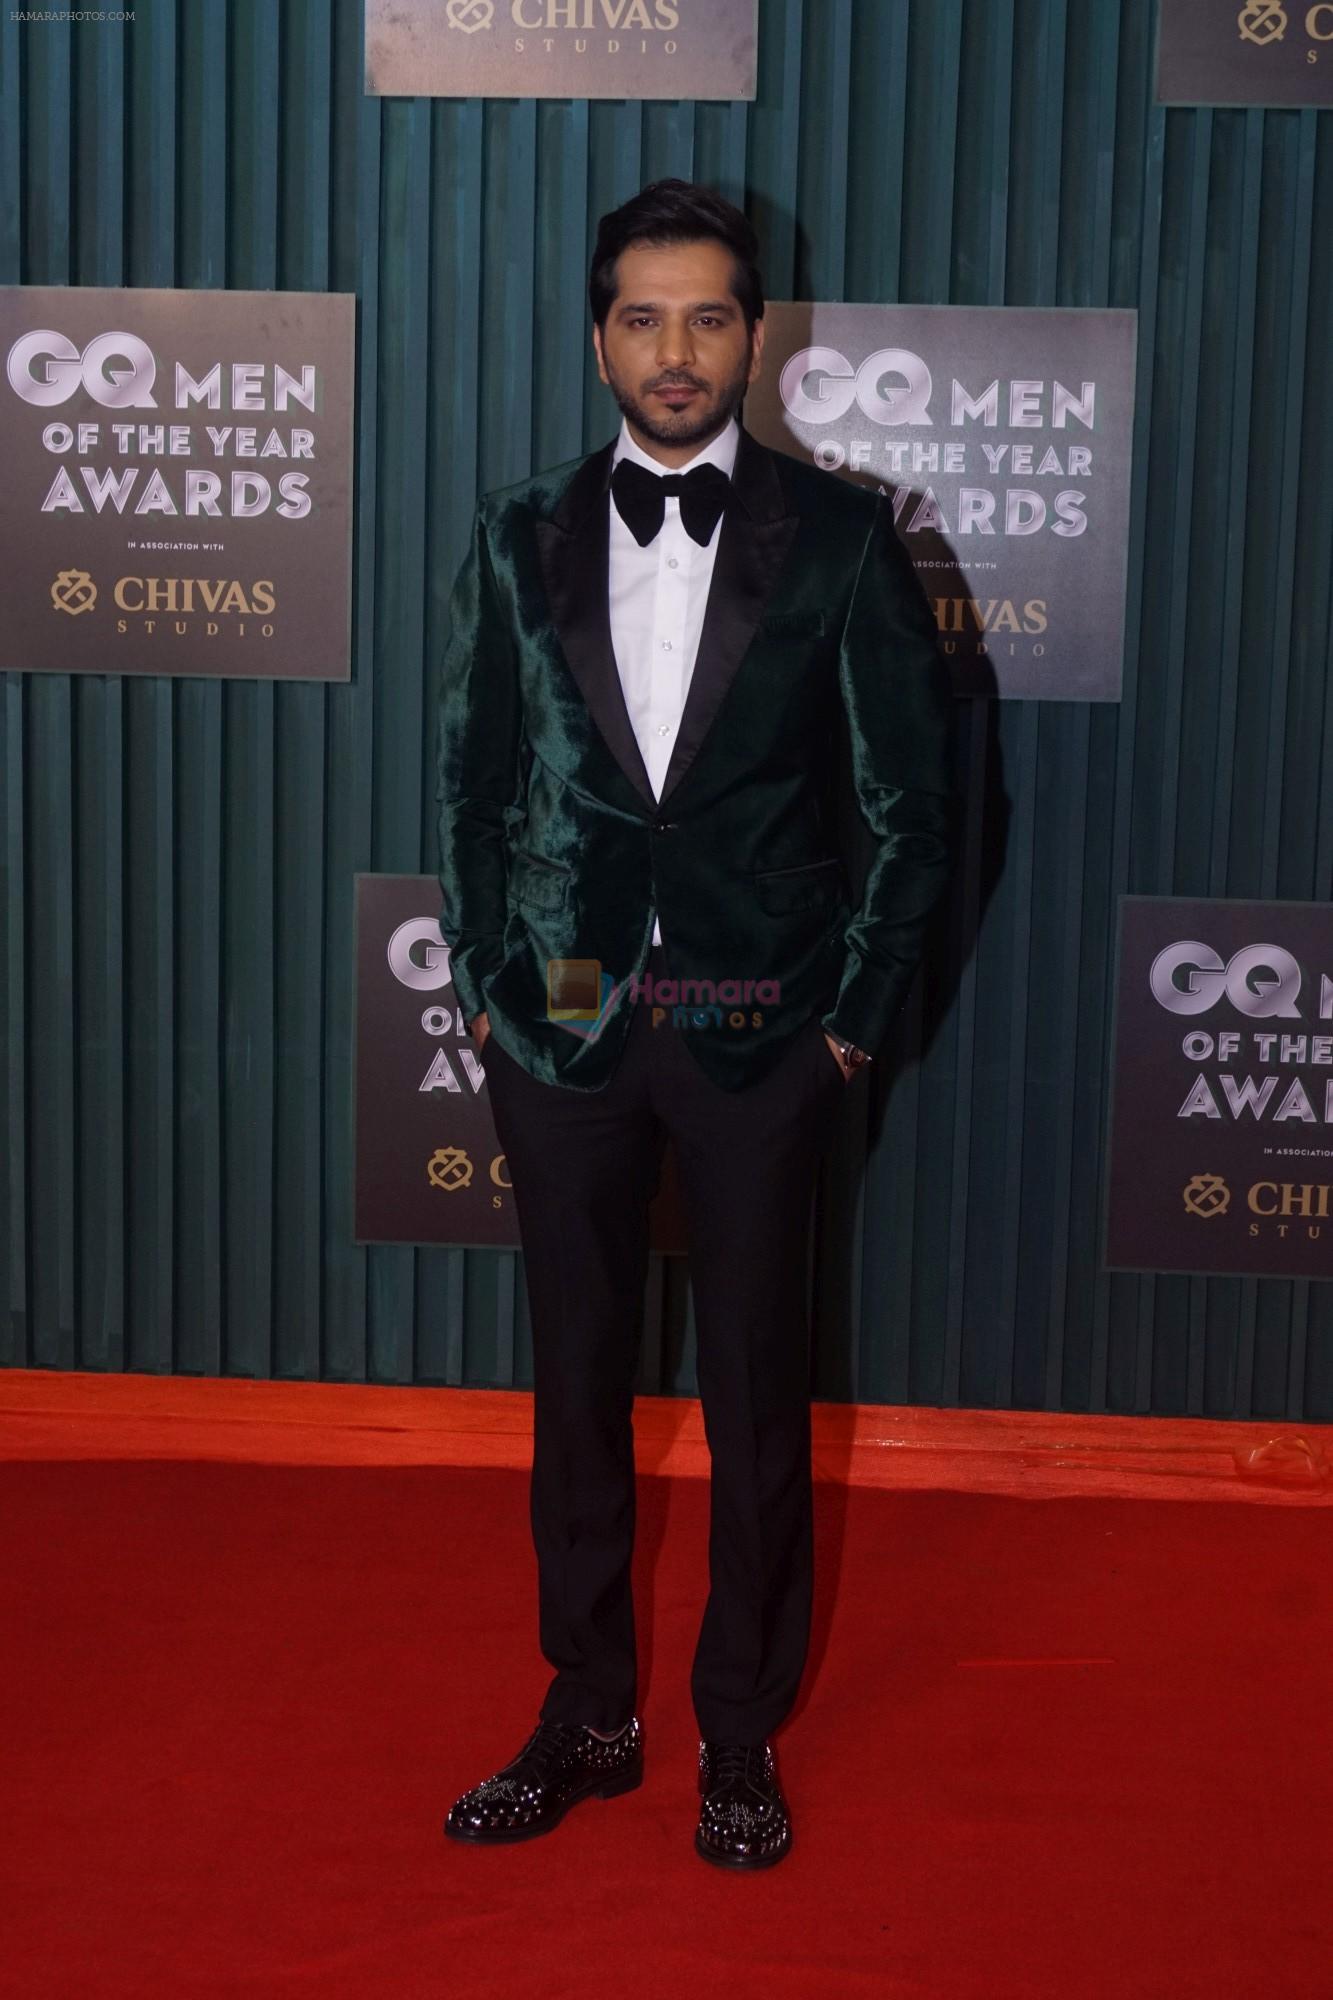 at GQ Men of the Year Awards 2018 on 27th Sept 2018